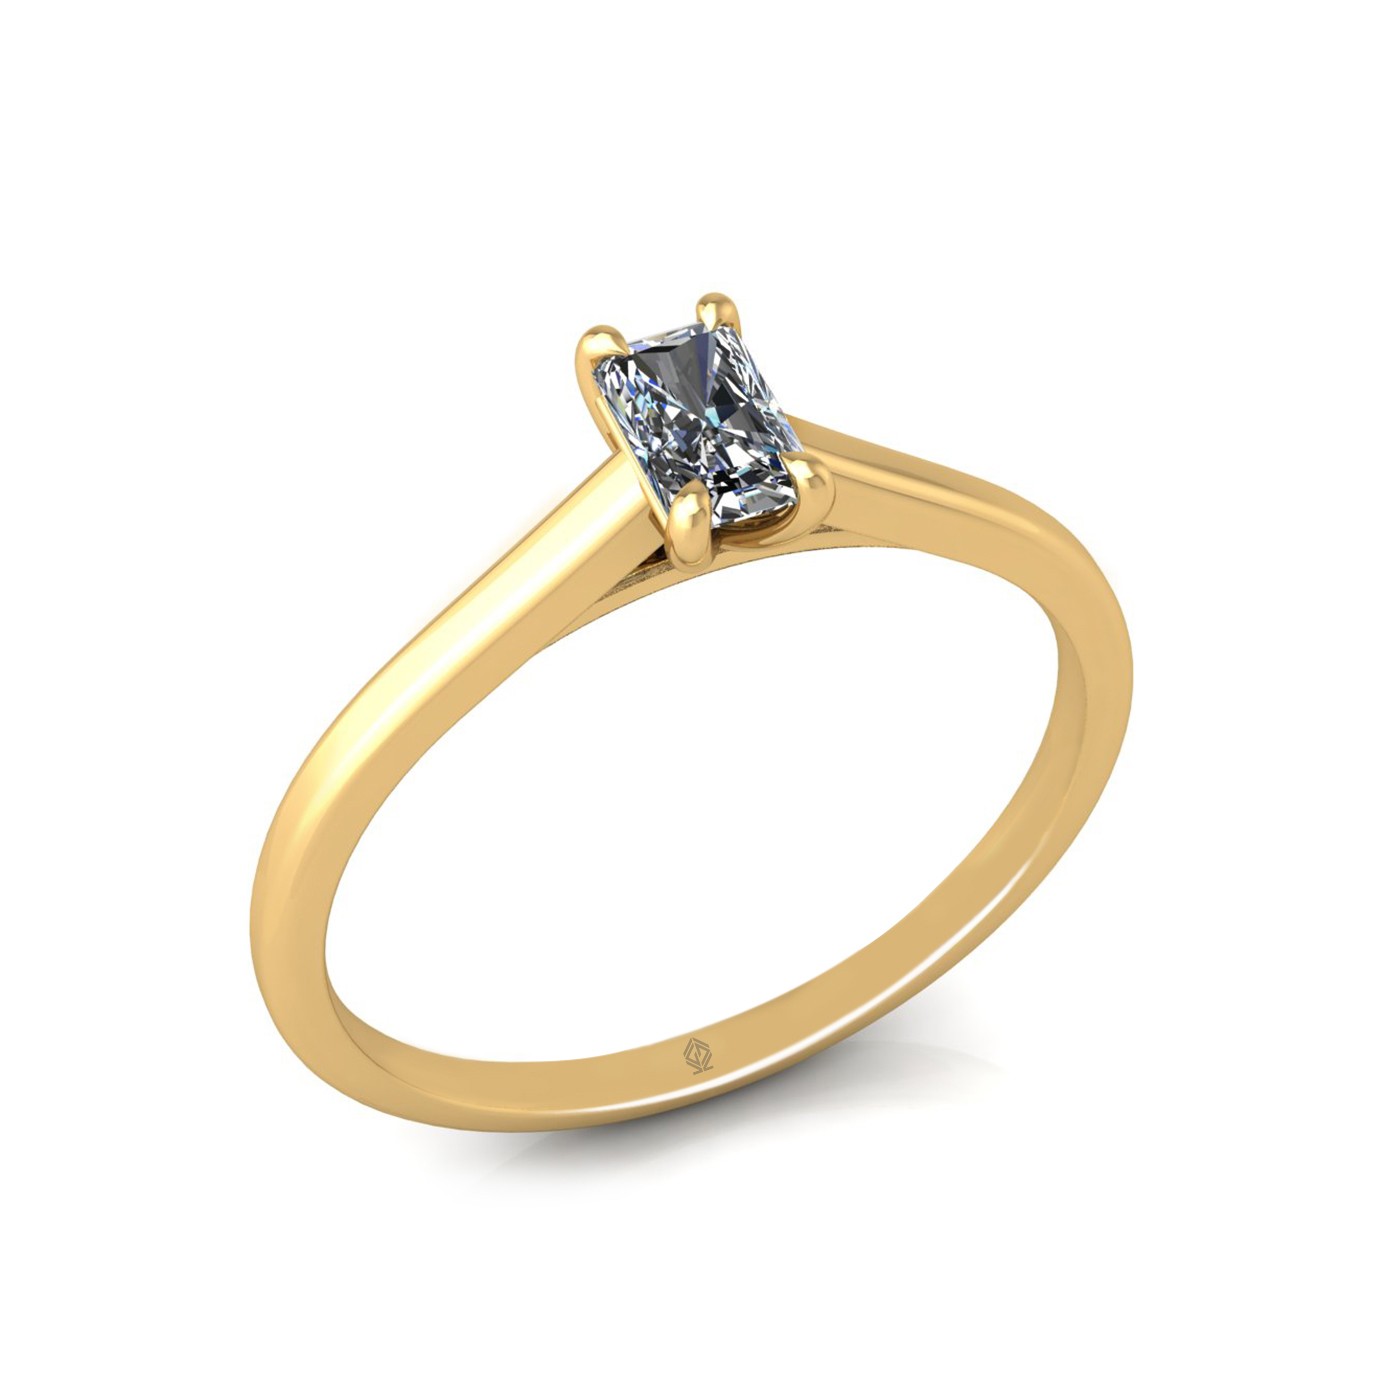 18k yellow gold  0,30 ct 4 prongs solitaire radiant cut diamond engagement ring with whisper thin band